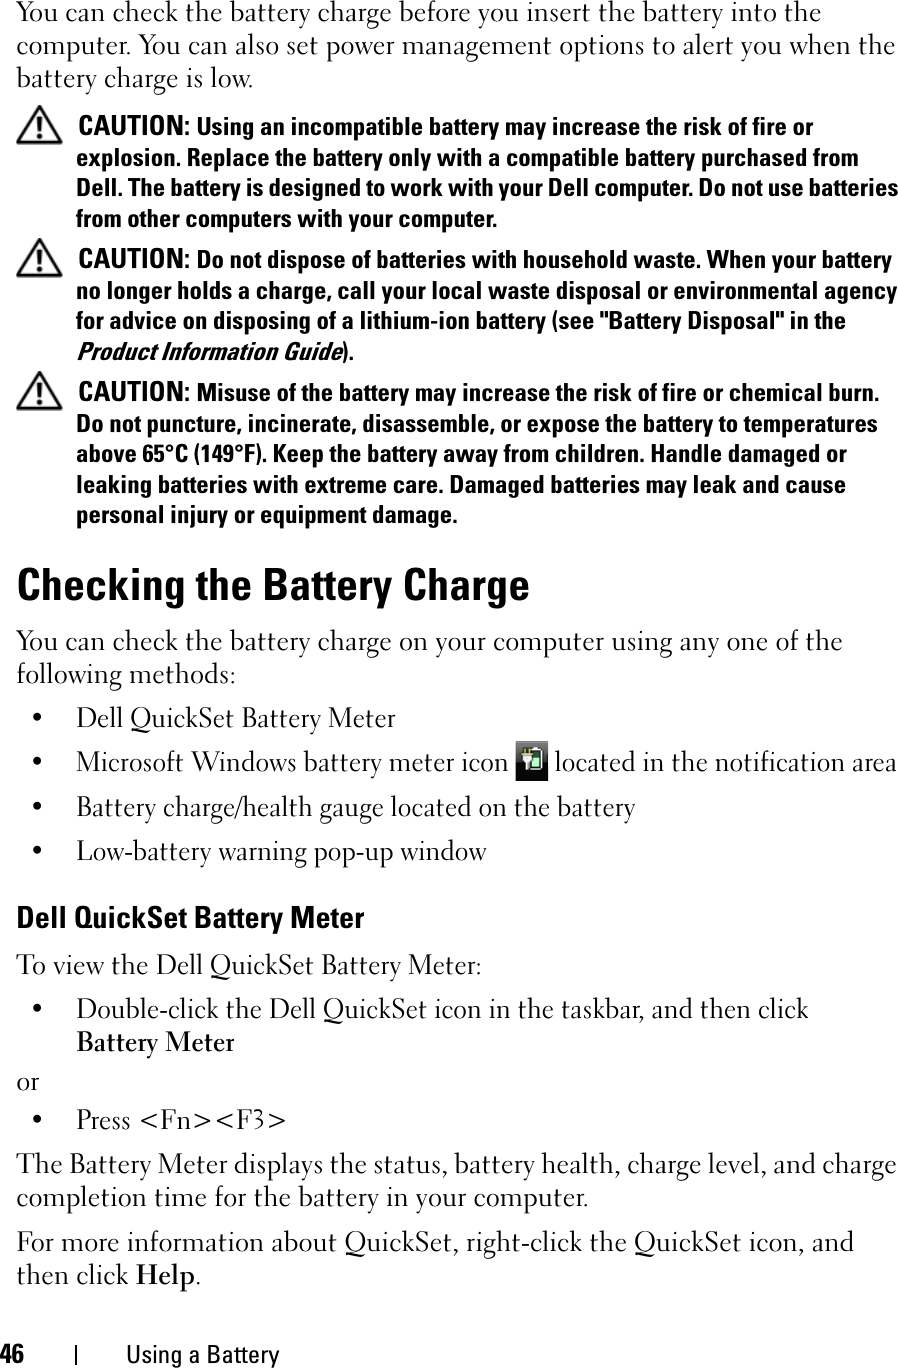 46 Using a BatteryYou can check the battery charge before you insert the battery into the computer. You can also set power management options to alert you when the battery charge is low.CAUTION: Using an incompatible battery may increase the risk of fire or explosion. Replace the battery only with a compatible battery purchased from Dell. The battery is designed to work with your Dell computer. Do not use batteries from other computers with your computer. CAUTION: Do not dispose of batteries with household waste. When your battery no longer holds a charge, call your local waste disposal or environmental agency for advice on disposing of a lithium-ion battery (see &quot;Battery Disposal&quot; in the Product Information Guide).CAUTION: Misuse of the battery may increase the risk of fire or chemical burn. Do not puncture, incinerate, disassemble, or expose the battery to temperatures above 65°C (149°F). Keep the battery away from children. Handle damaged or leaking batteries with extreme care. Damaged batteries may leak and cause personal injury or equipment damage. Checking the Battery ChargeYou can check the battery charge on your computer using any one of the following methods:• Dell QuickSet Battery Meter• Microsoft Windows battery meter icon   located in the notification area• Battery charge/health gauge located on the battery• Low-battery warning pop-up windowDell QuickSet Battery MeterTo view the Dell QuickSet Battery Meter:• Double-click the Dell QuickSet icon in the taskbar, and then click Battery Meteror• Press &lt;Fn&gt;&lt;F3&gt;The Battery Meter displays the status, battery health, charge level, and charge completion time for the battery in your computer. For more information about QuickSet, right-click the QuickSet icon, and then click Help.